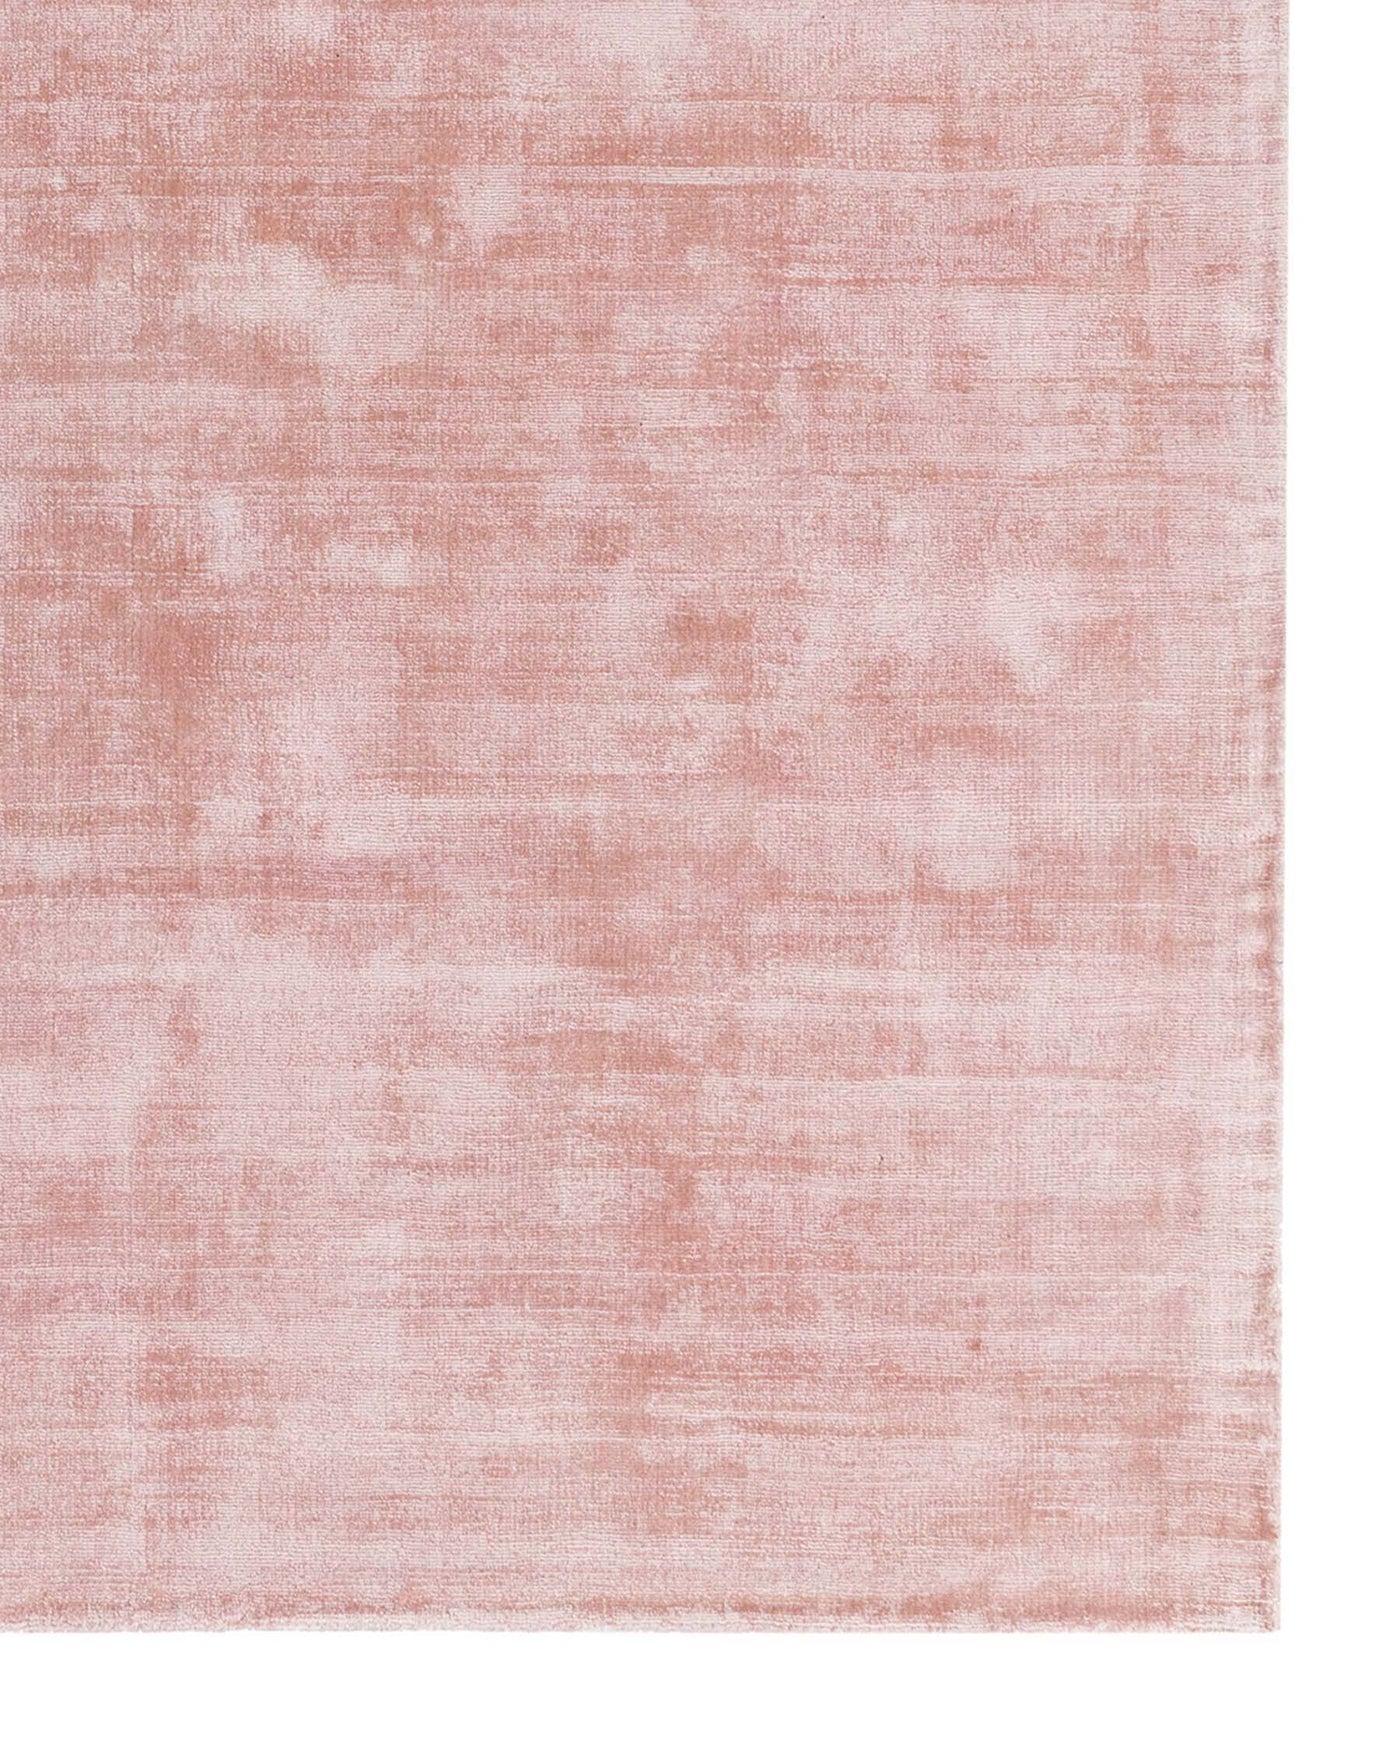 Soft blush pink area rug with a subtle distressed texture effect.